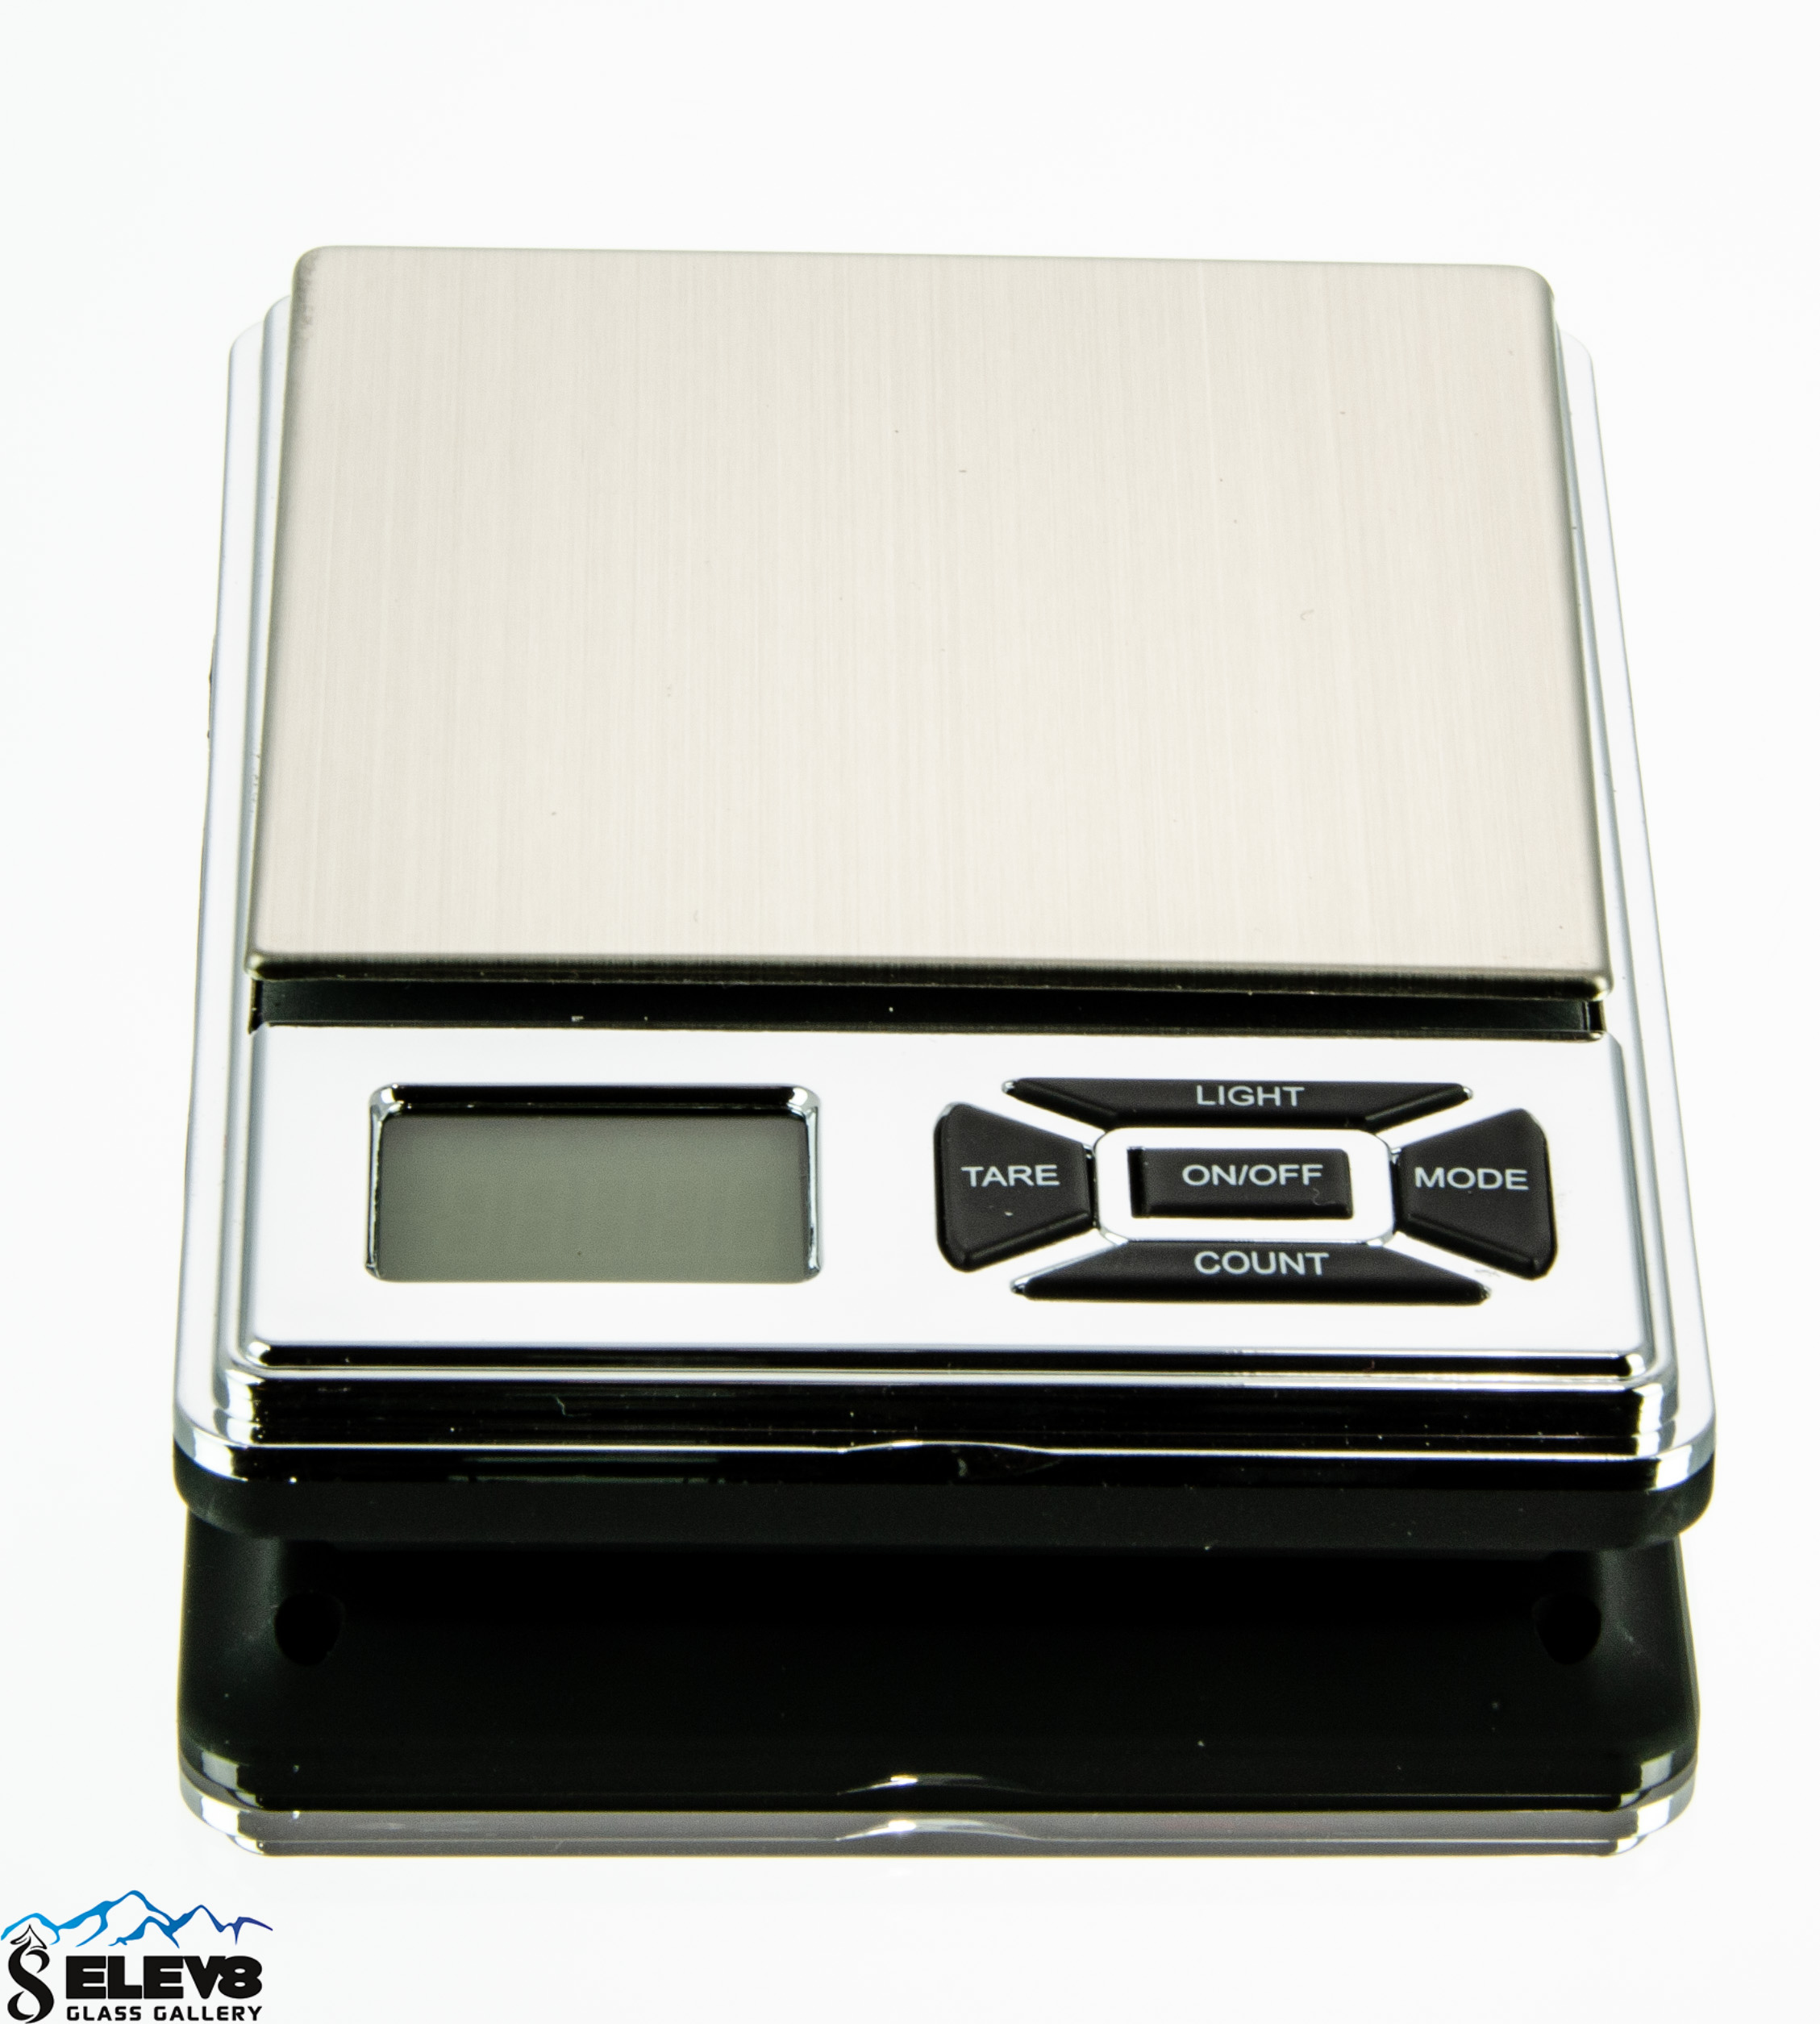 Digital Pocket Weight Scale with Retractable Display 100g x 0.01g - Elev8